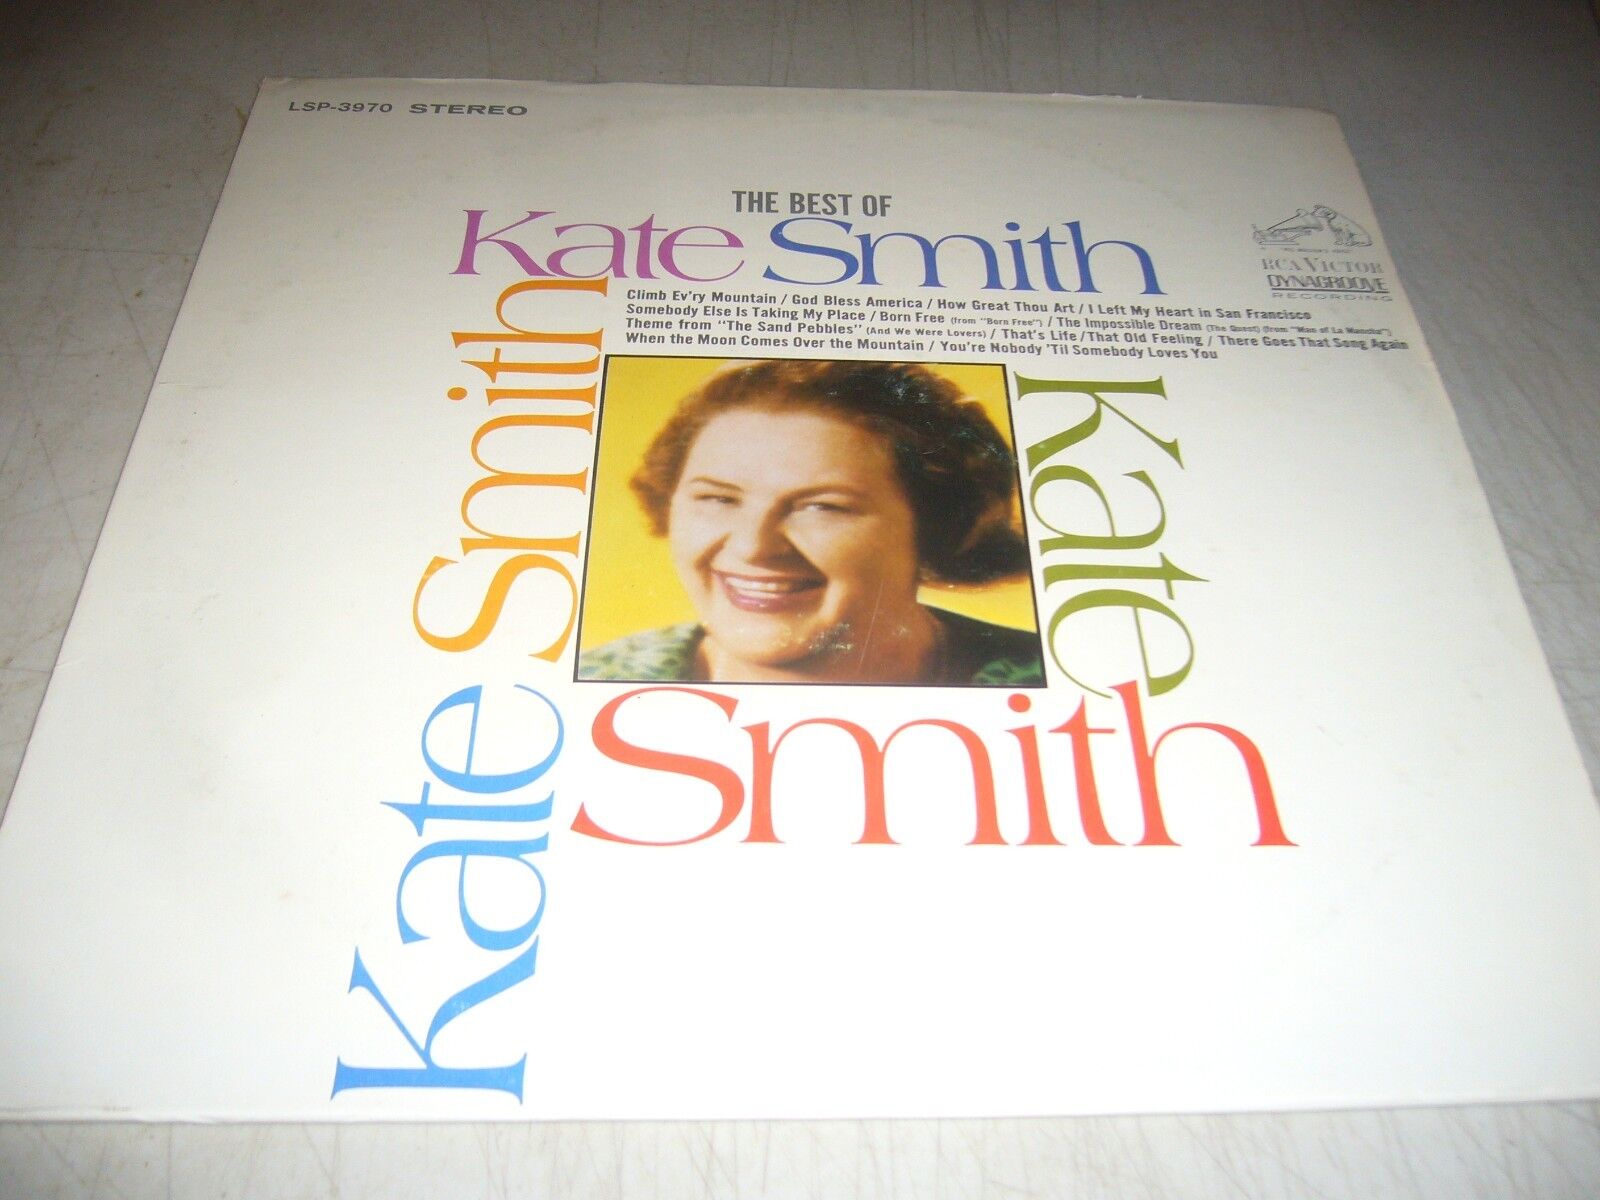 THE BEST OF KATE SMITH LP NM RCA Victor LSP-3970 1968